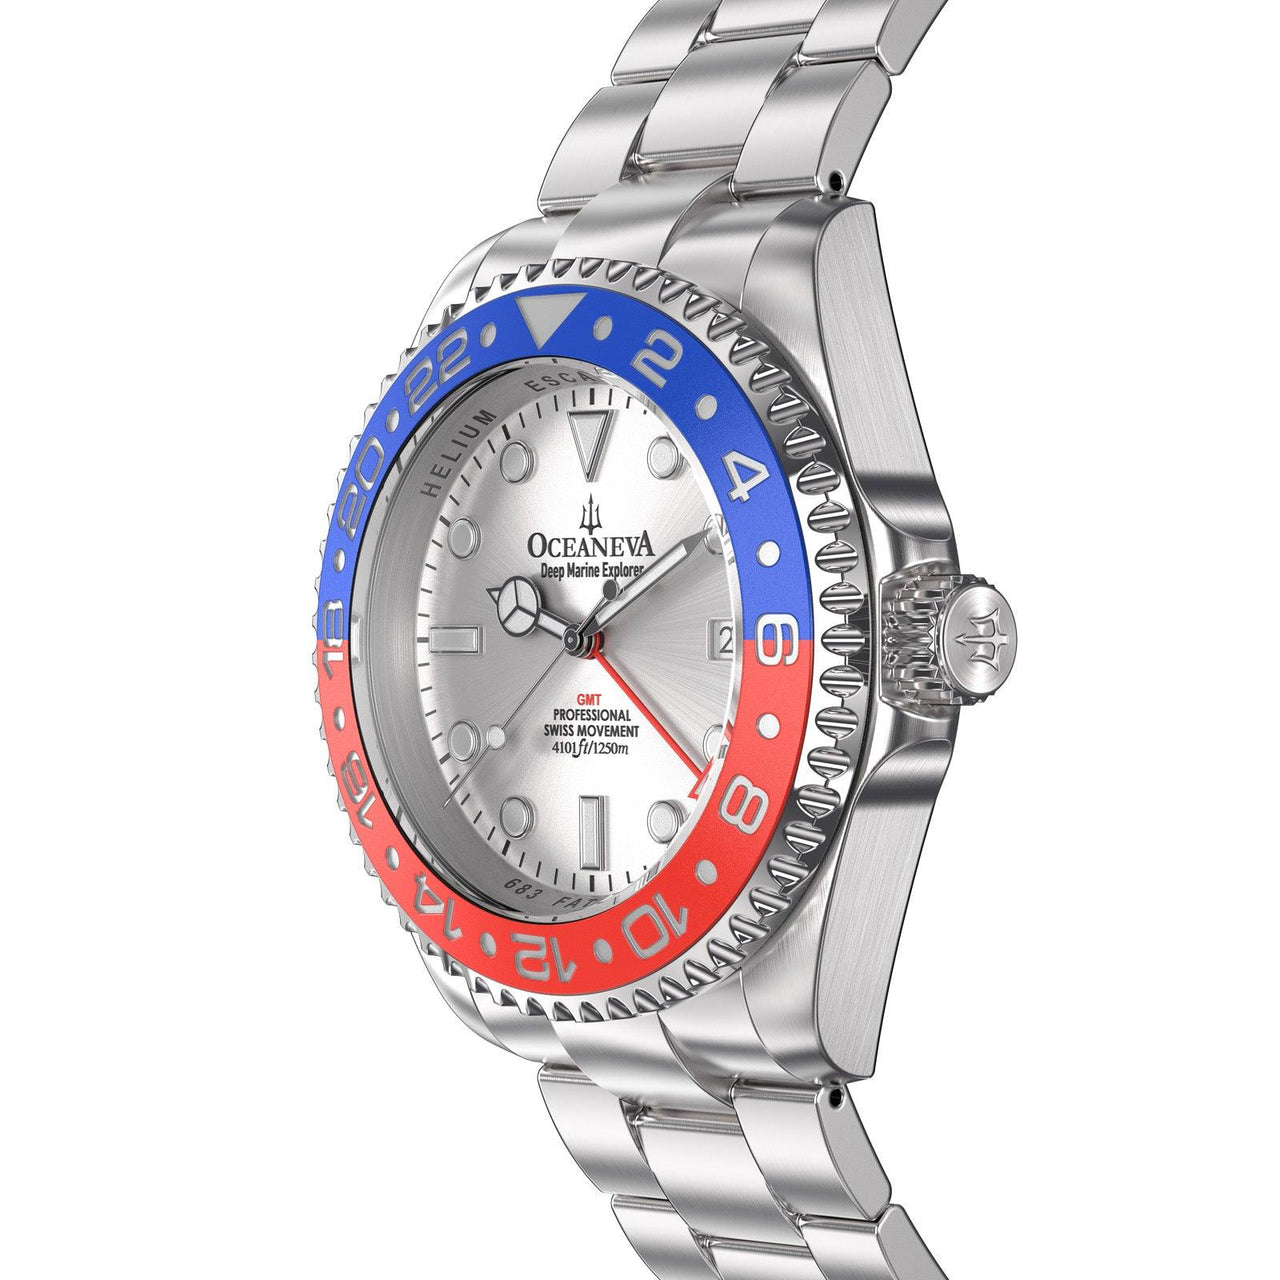 Oceaneva 1250M GMT Dive Watch Silver Blue And Red Side View Crown